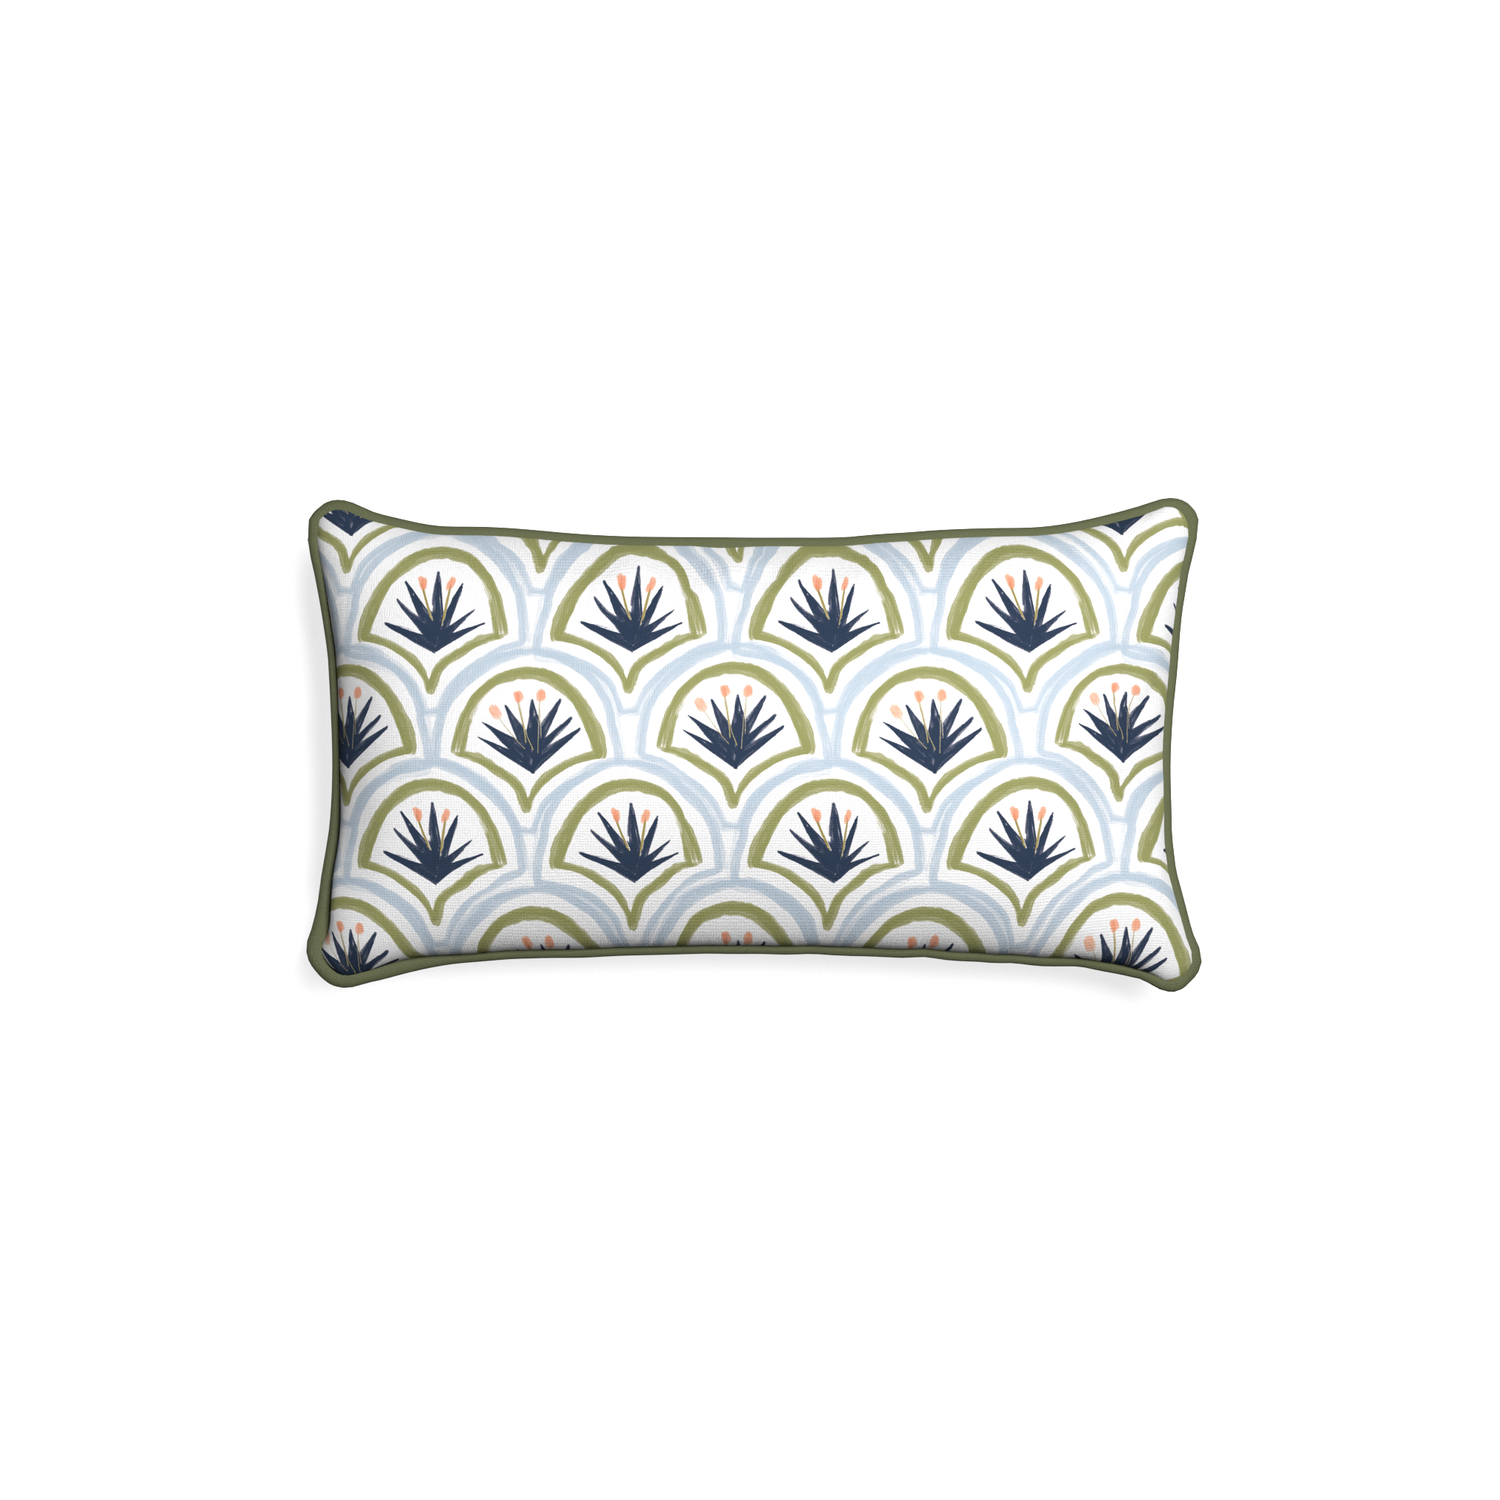 Petite-lumbar thatcher midnight custom art deco palm patternpillow with f piping on white background